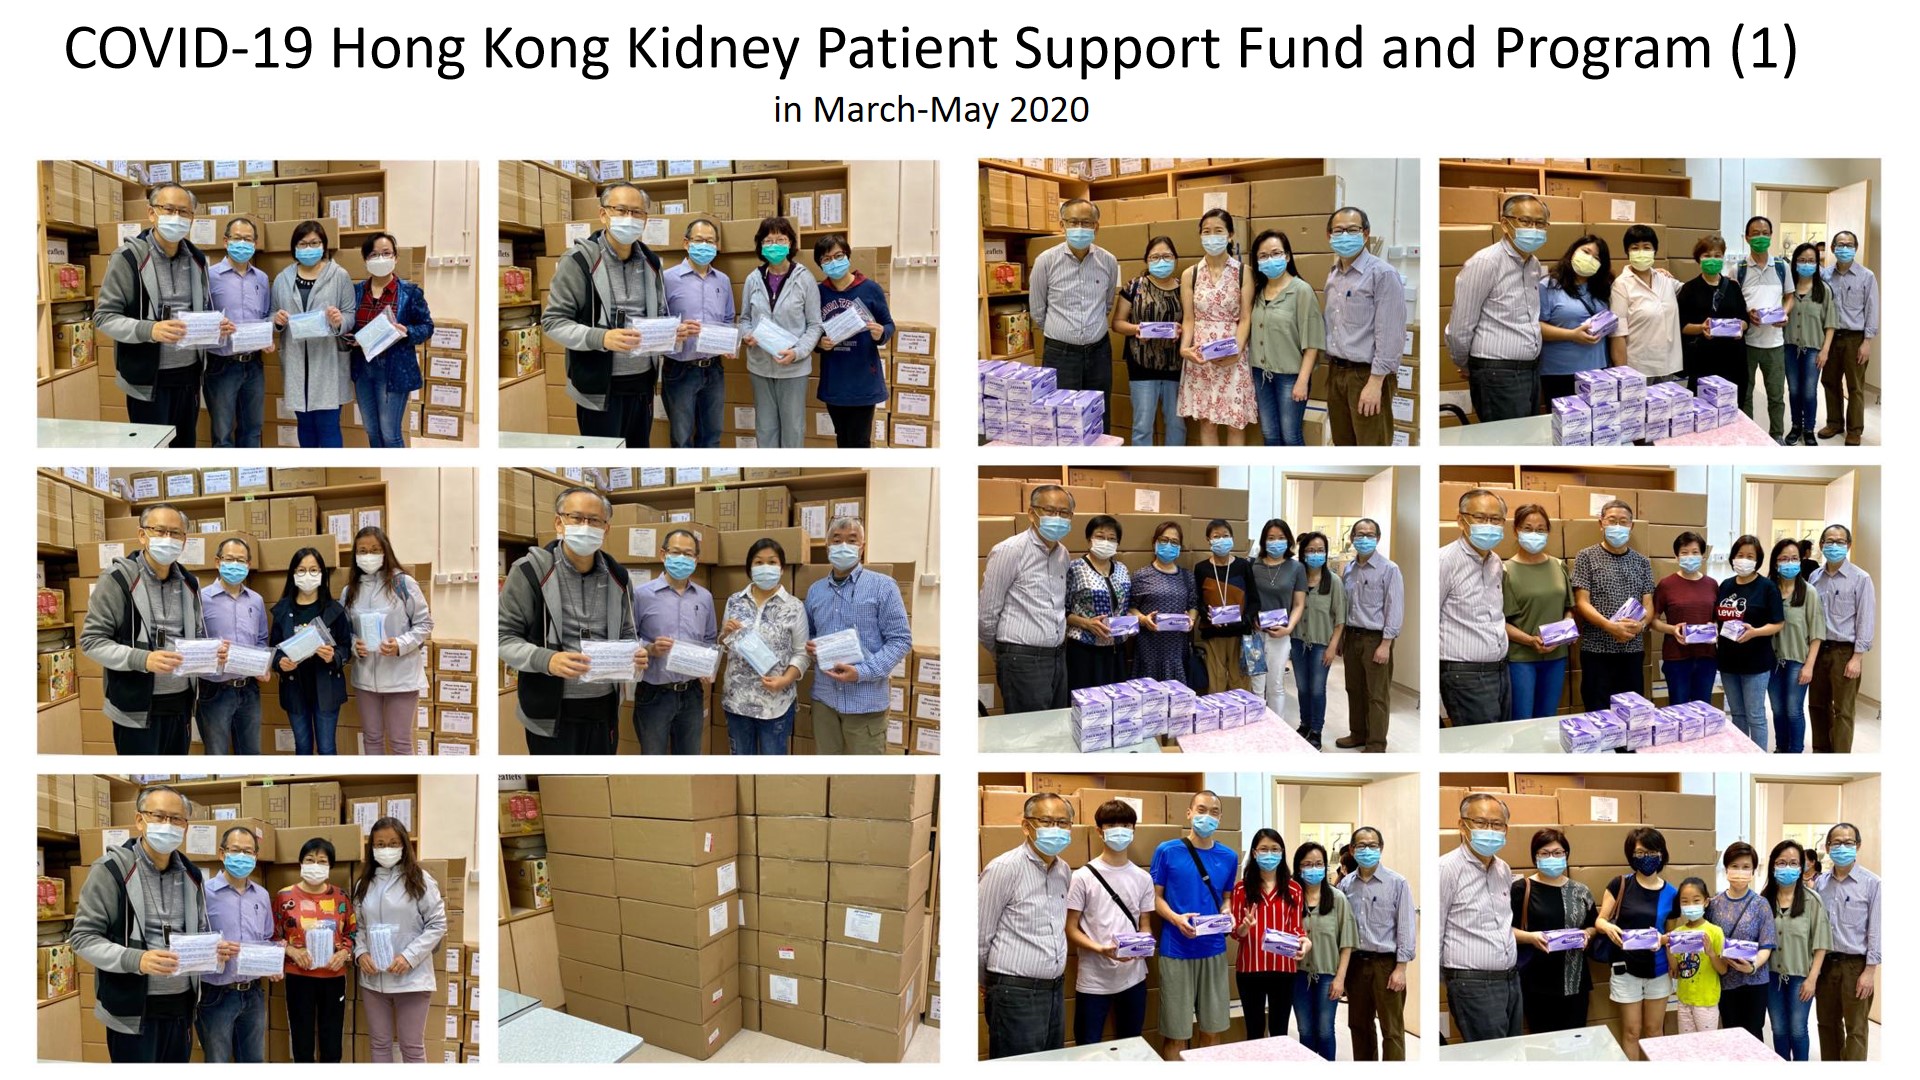 COVID 19 HK Kidney Patient Support Fund and Program 1 Mar May 2020 b